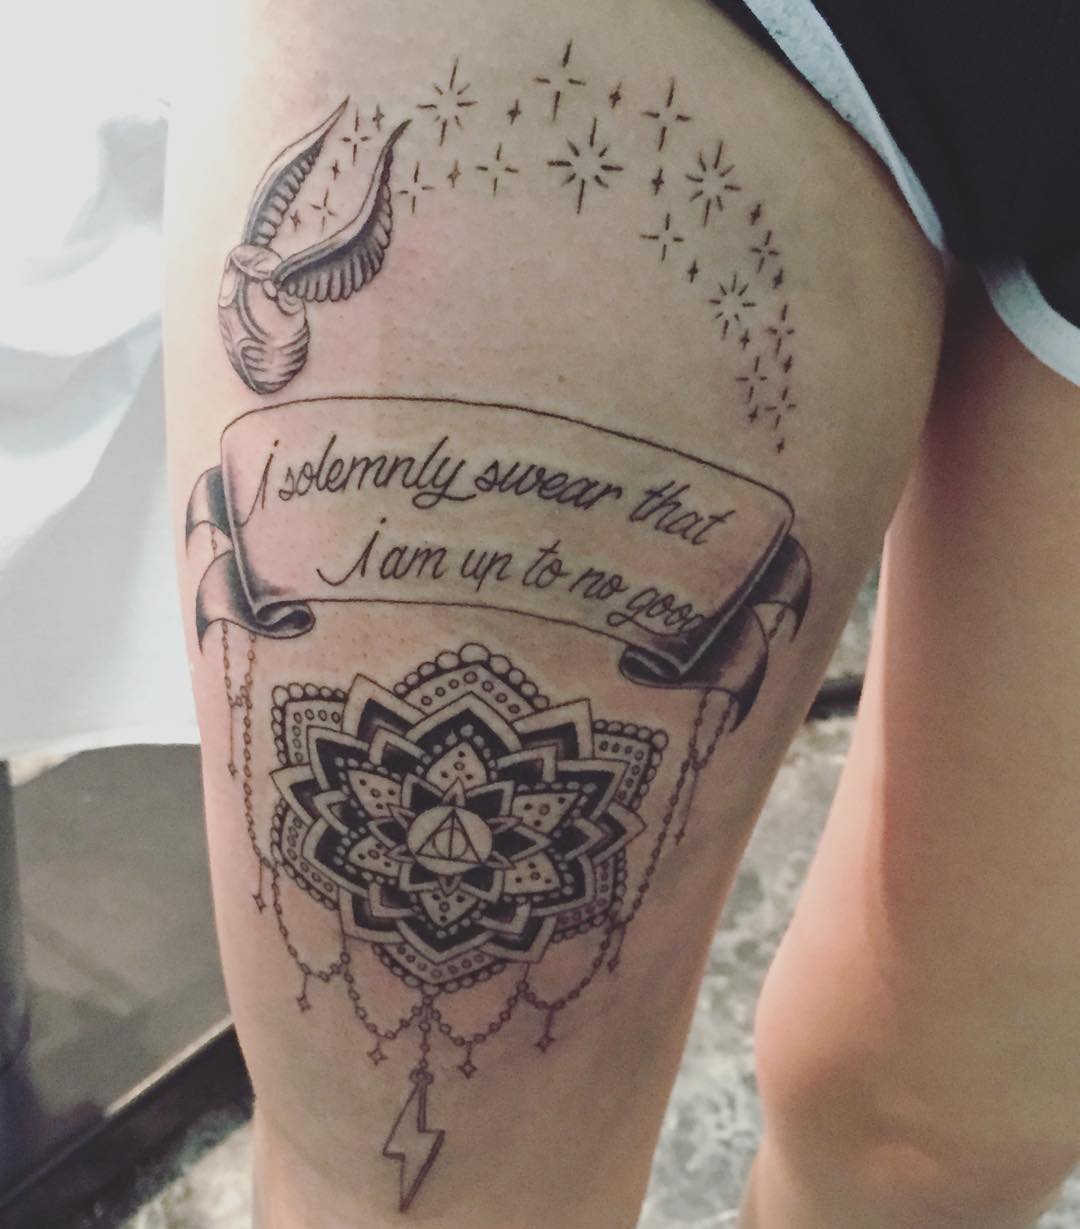 I solemnly swear that I am up to no good tattoo 1